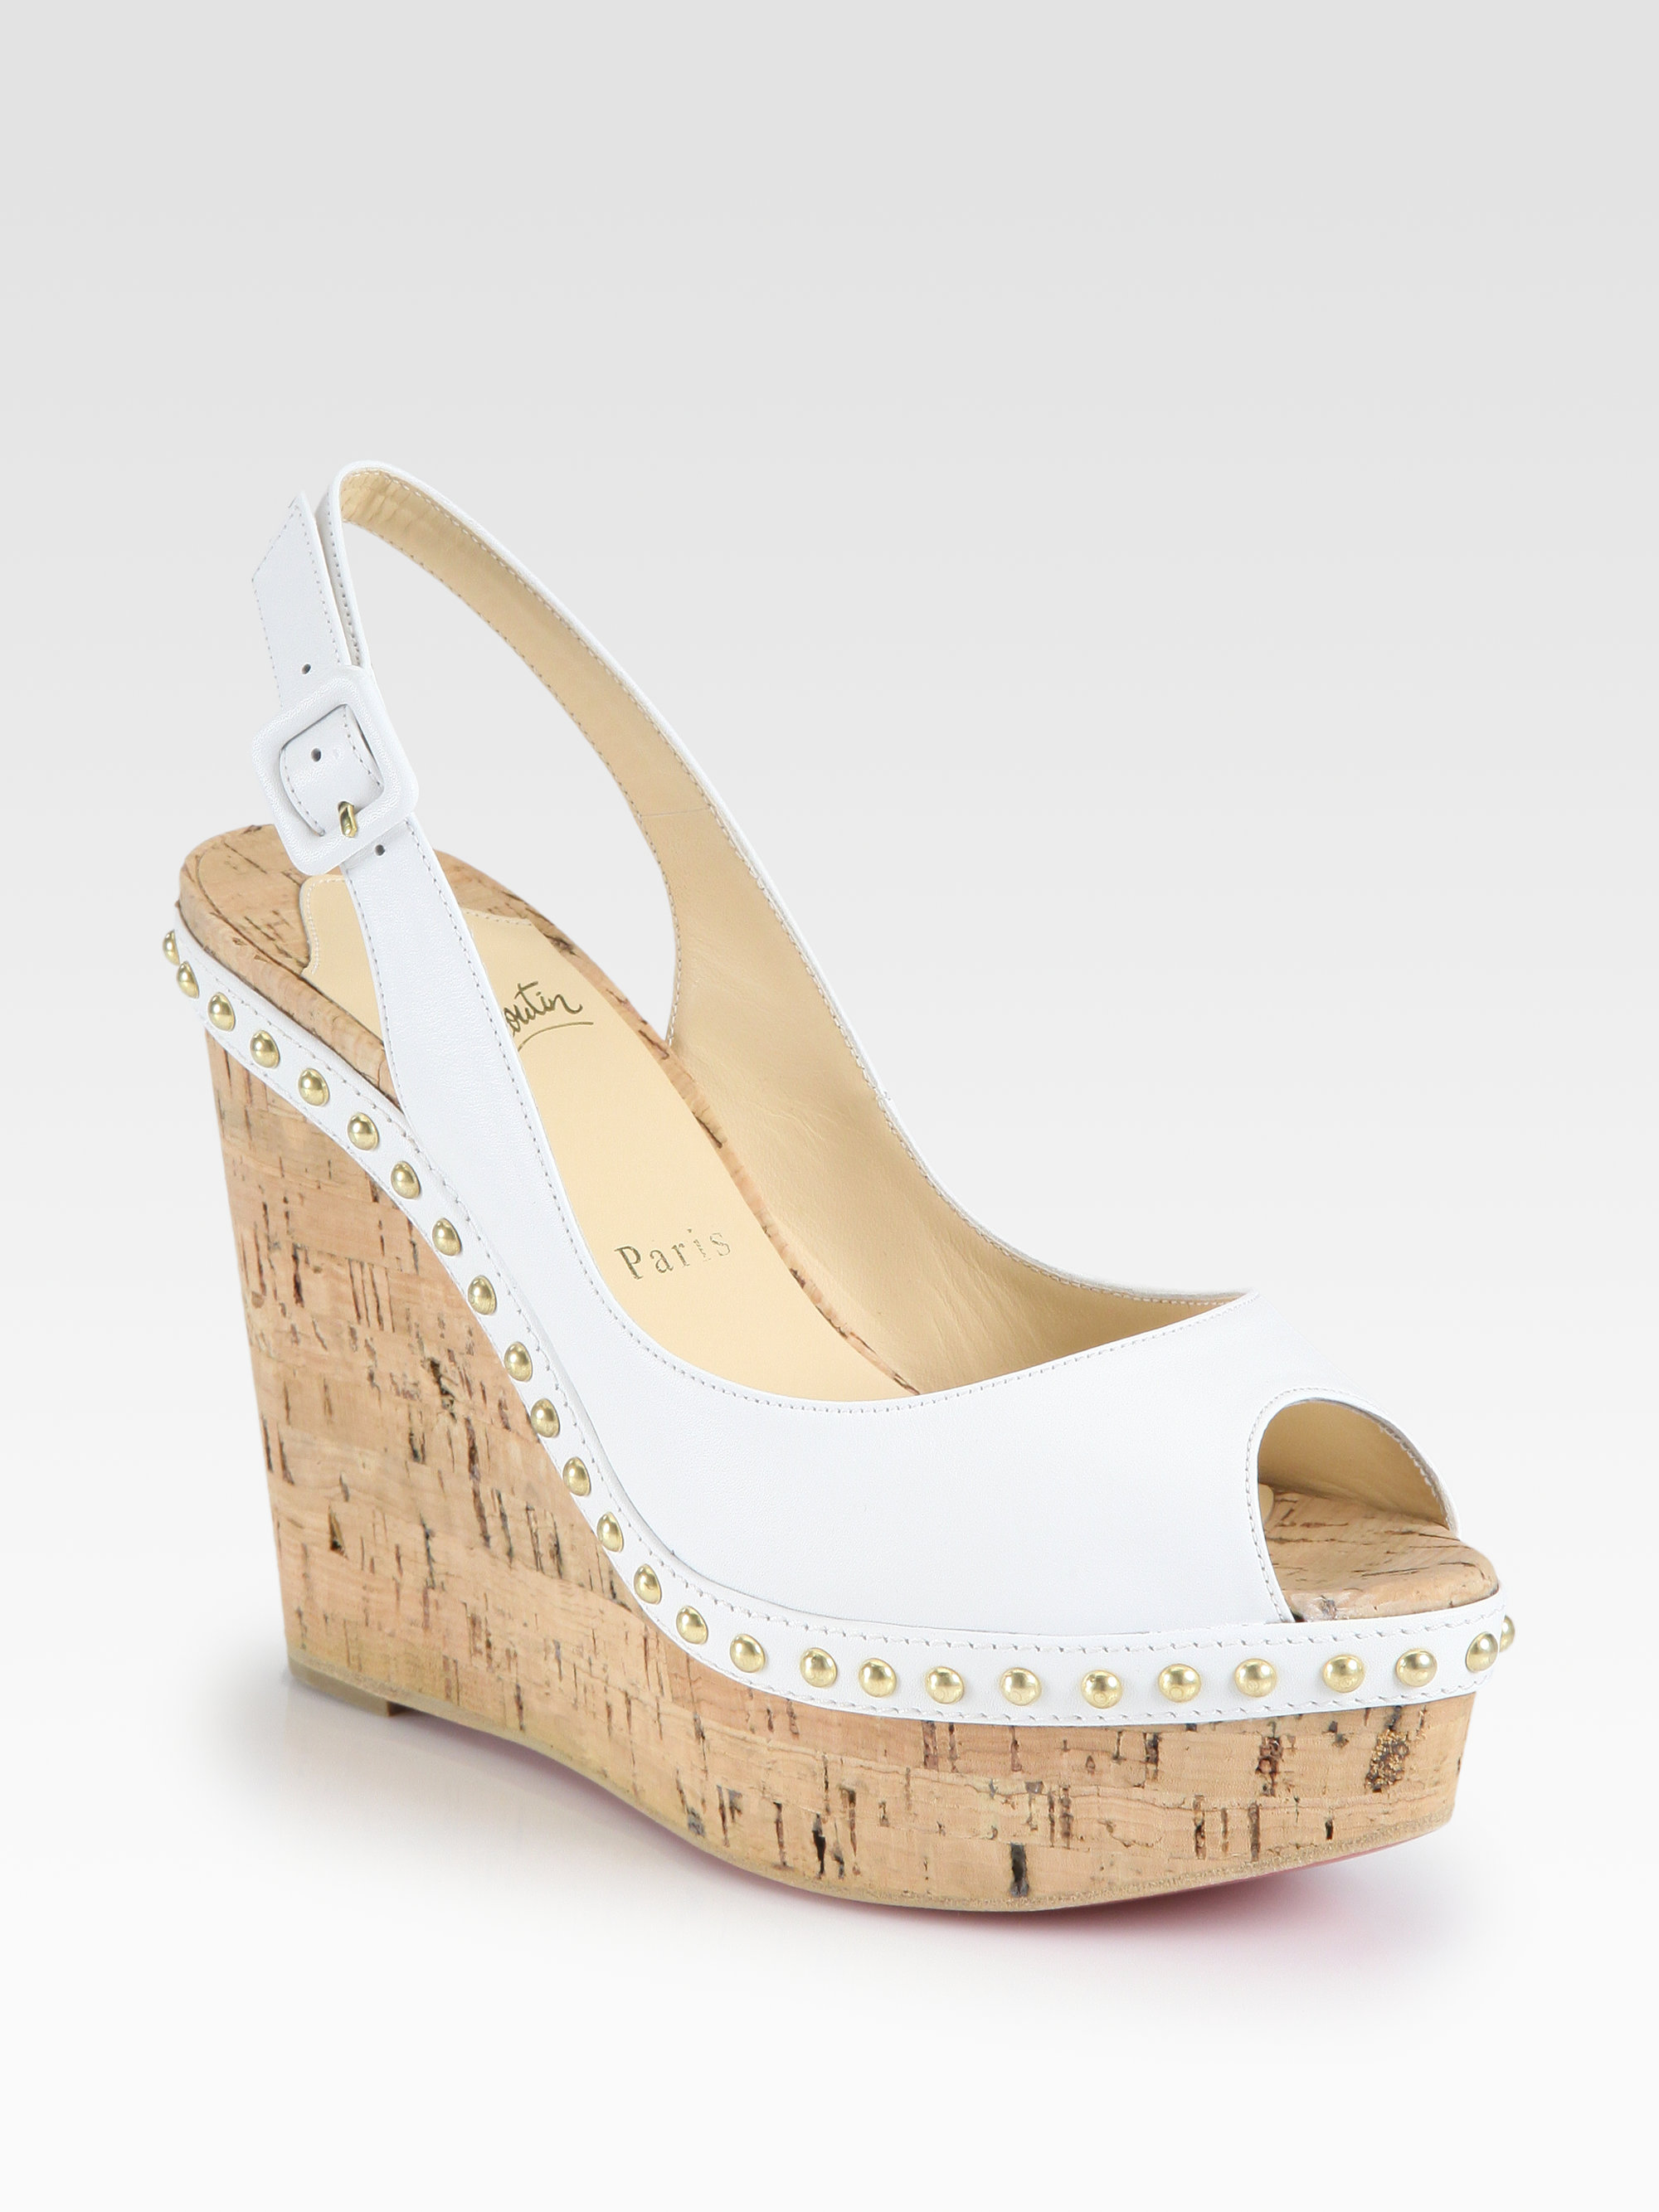 christian louboutin men online store - Christian louboutin Monico Studded Leather Cork Wedge Pumps in ...